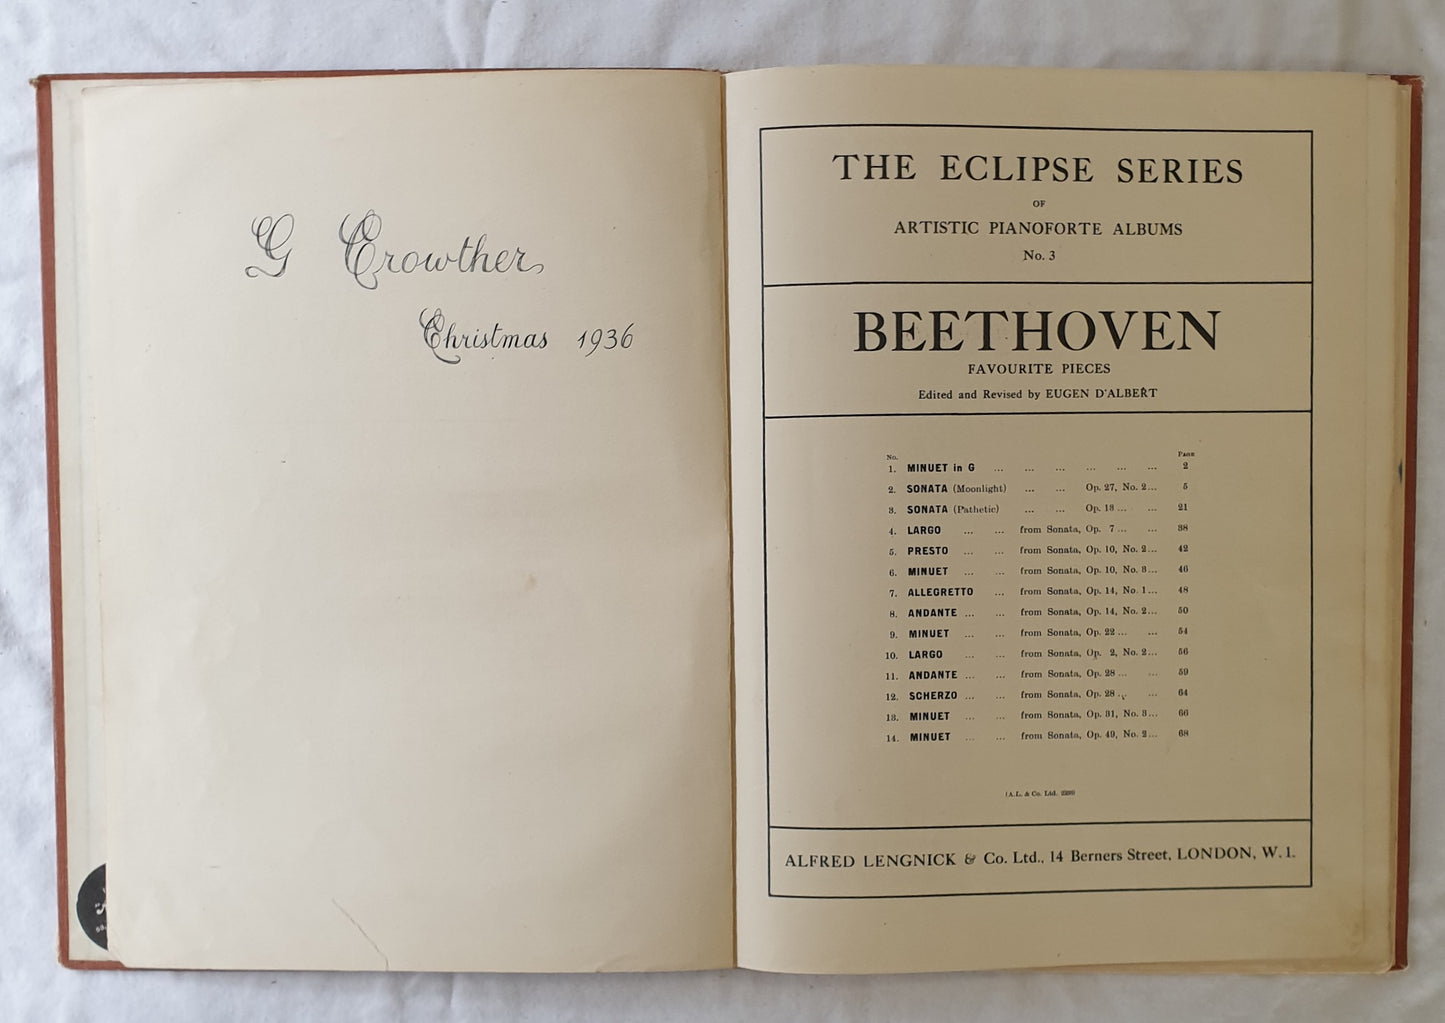 Beethoven Favourite Pieces by Eugen D’Albert